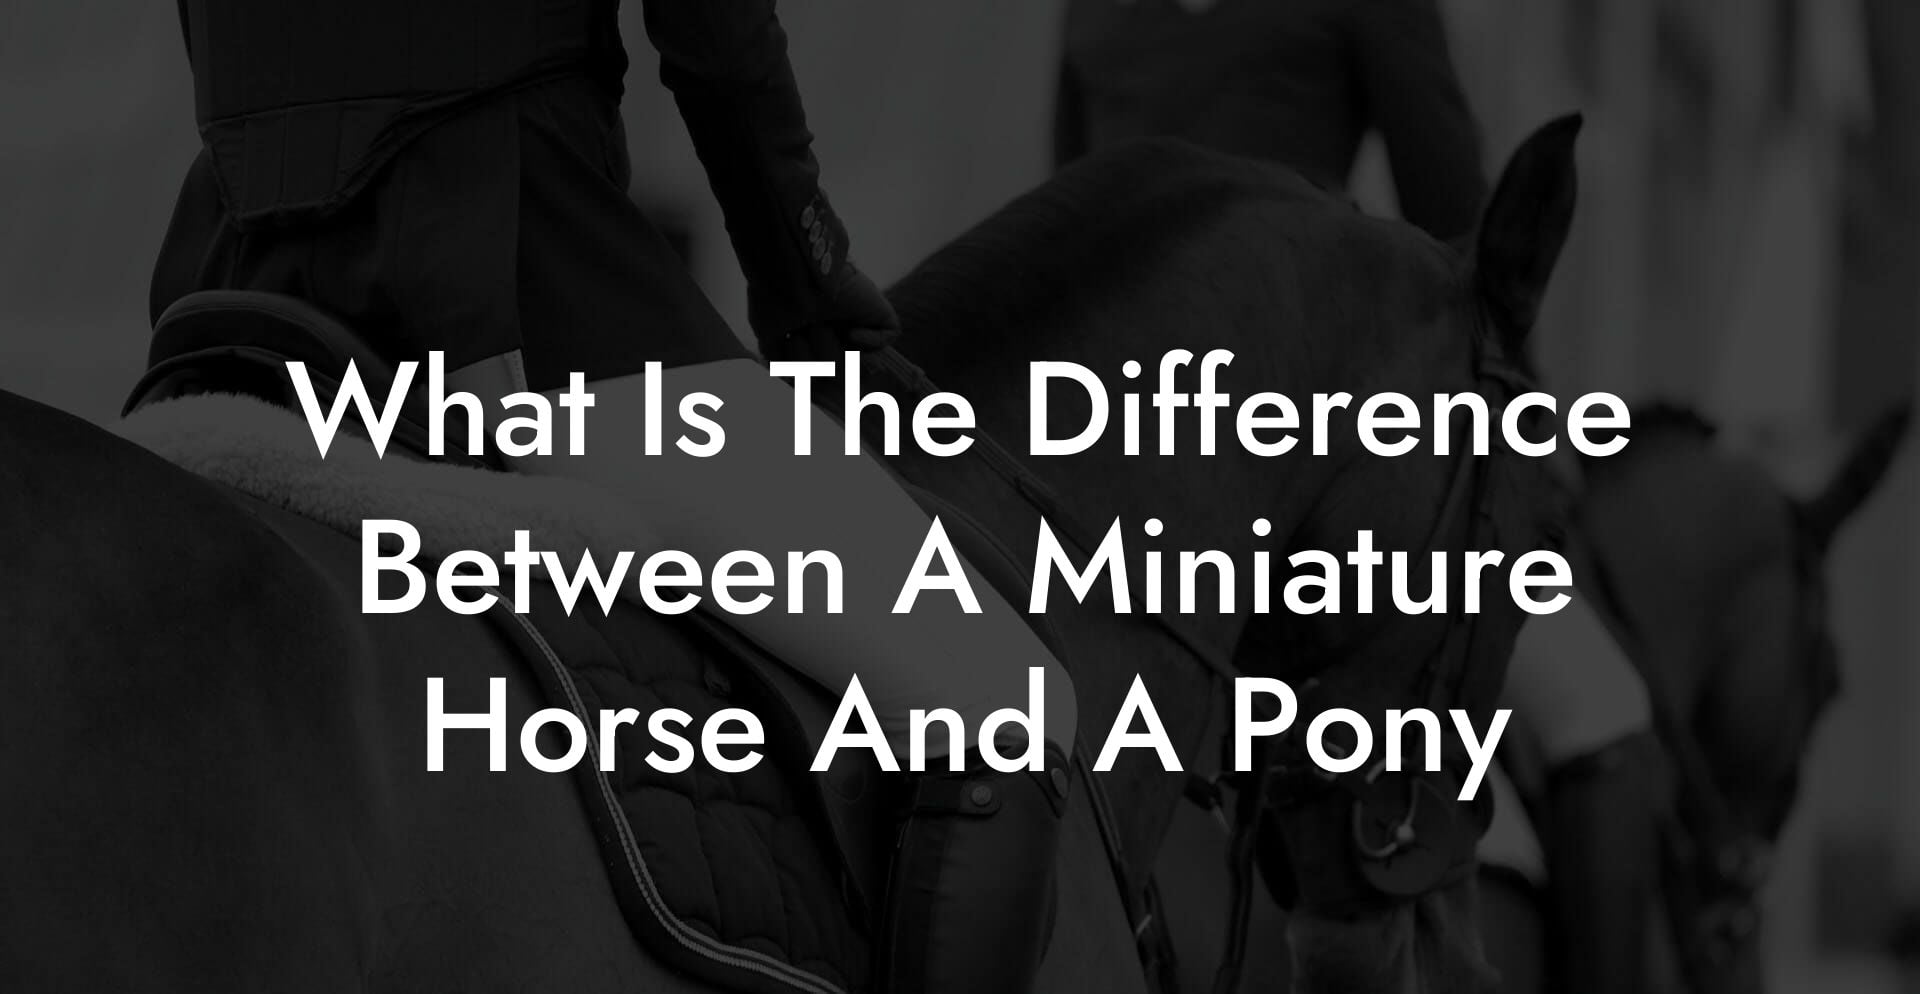 What Is The Difference Between A Miniature Horse And A Pony